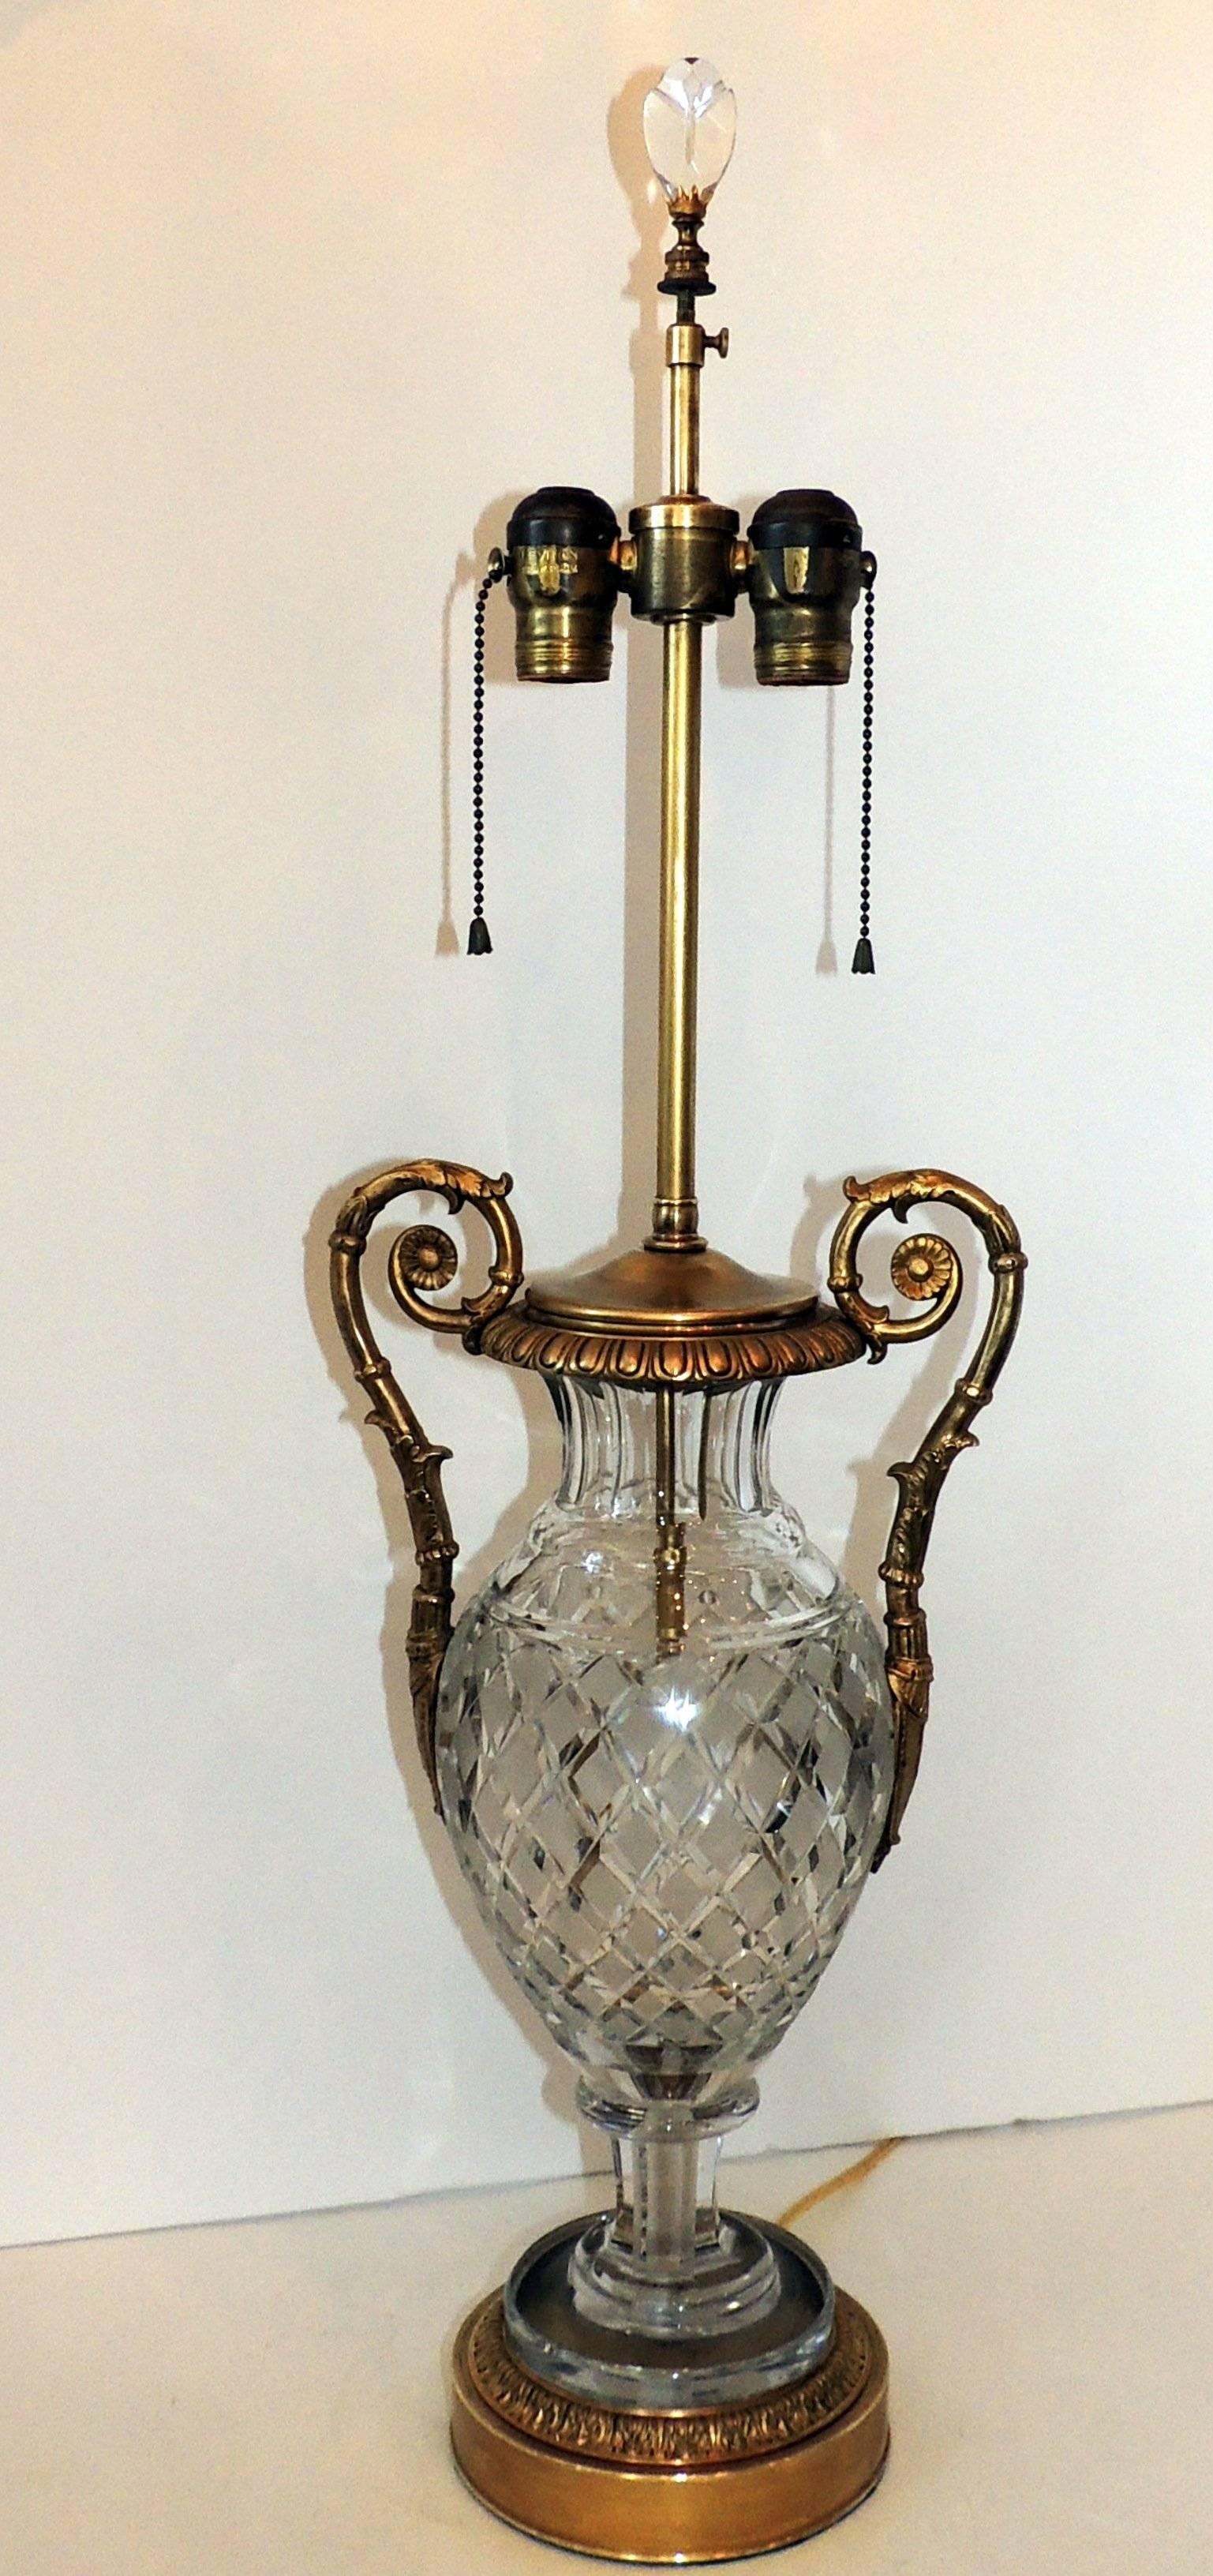 Gilt Beautiful Pair French Cut Crystal Doré Bronze Ormolu-Mounted Neoclassical Lamps For Sale